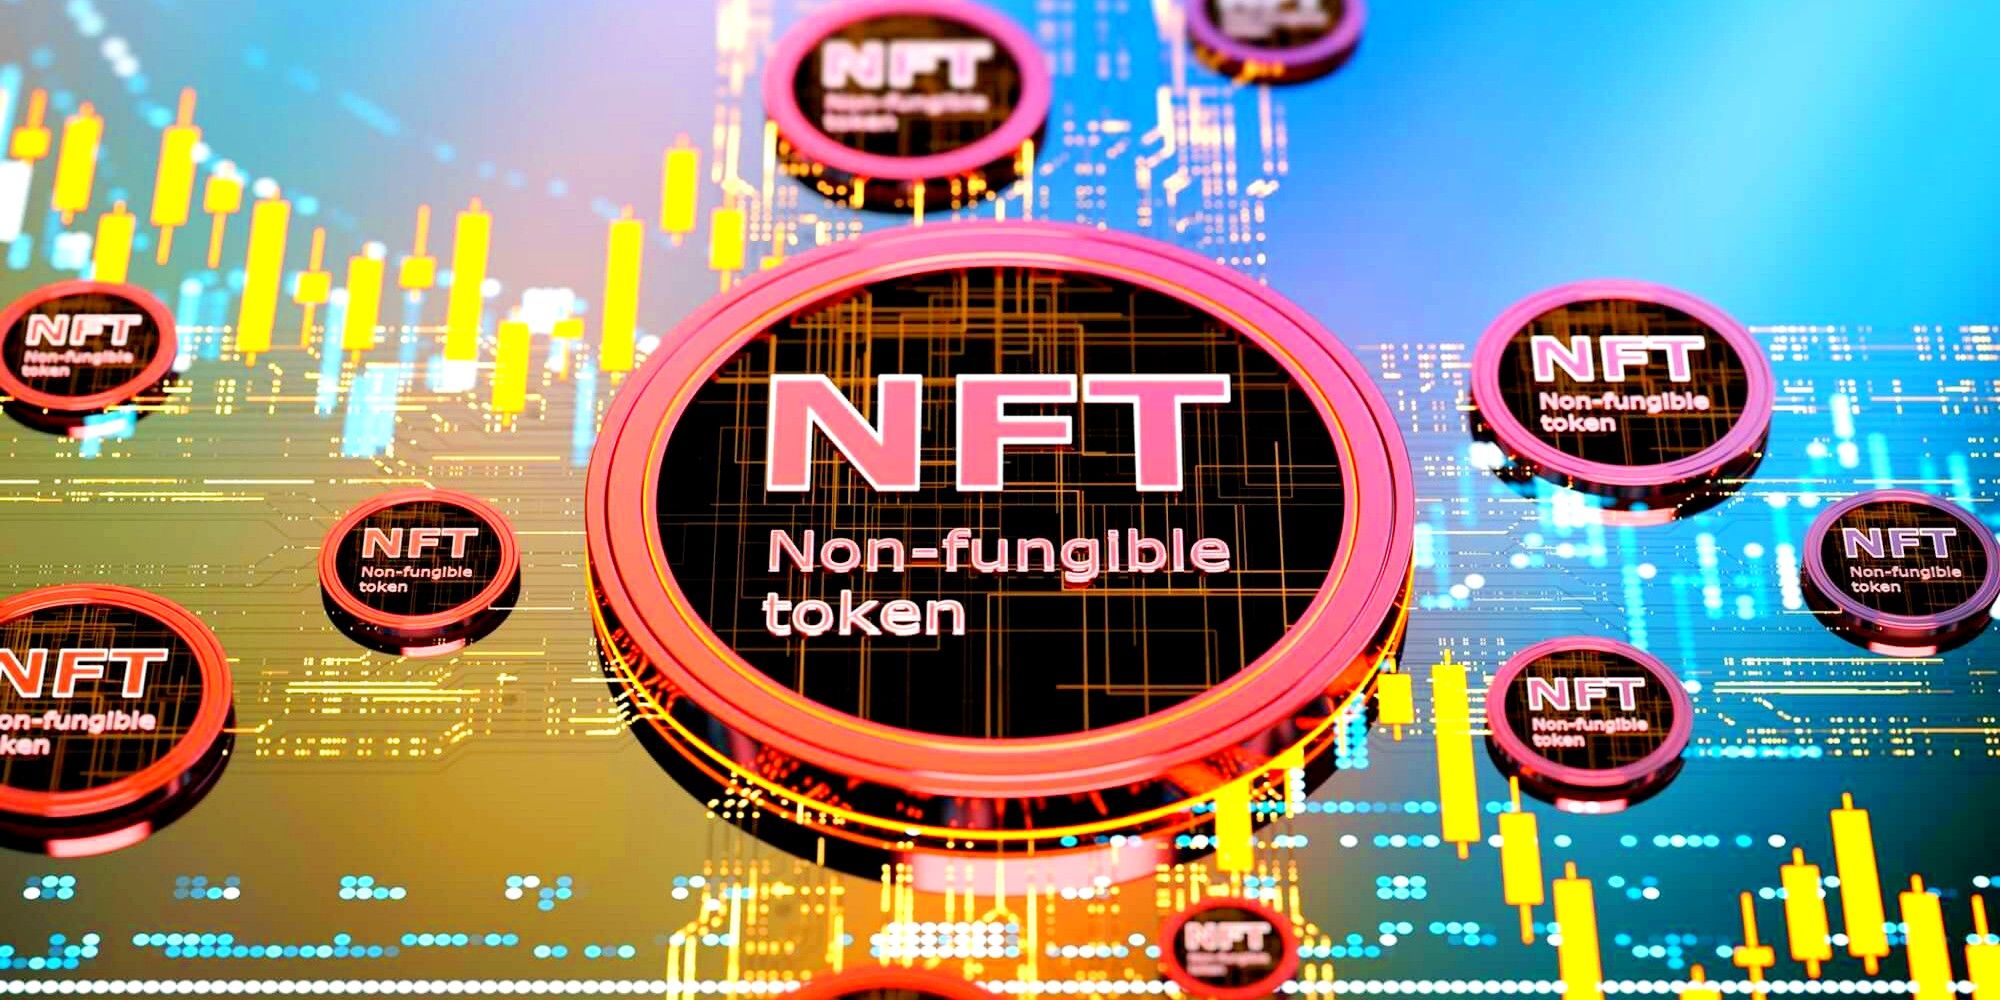 NFT digital art with multiple tokens scattered around token in middle